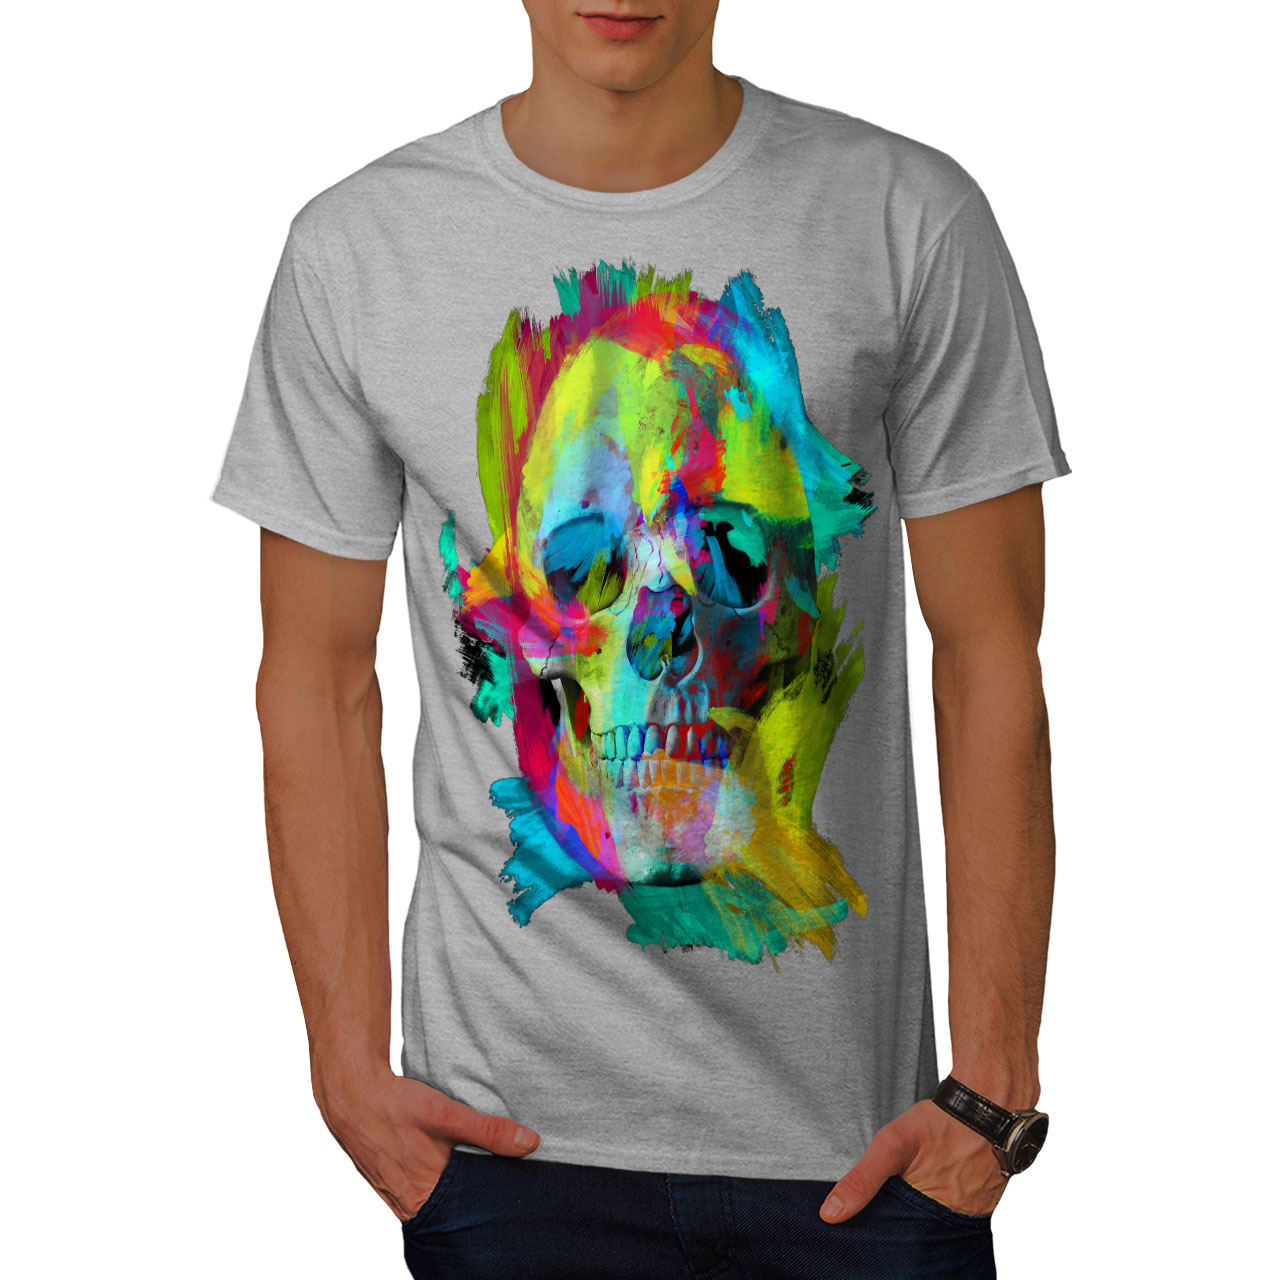 Festival Graphic Design Printed Tee Wellcoda Colorful Paint Rock Mens T-shirt